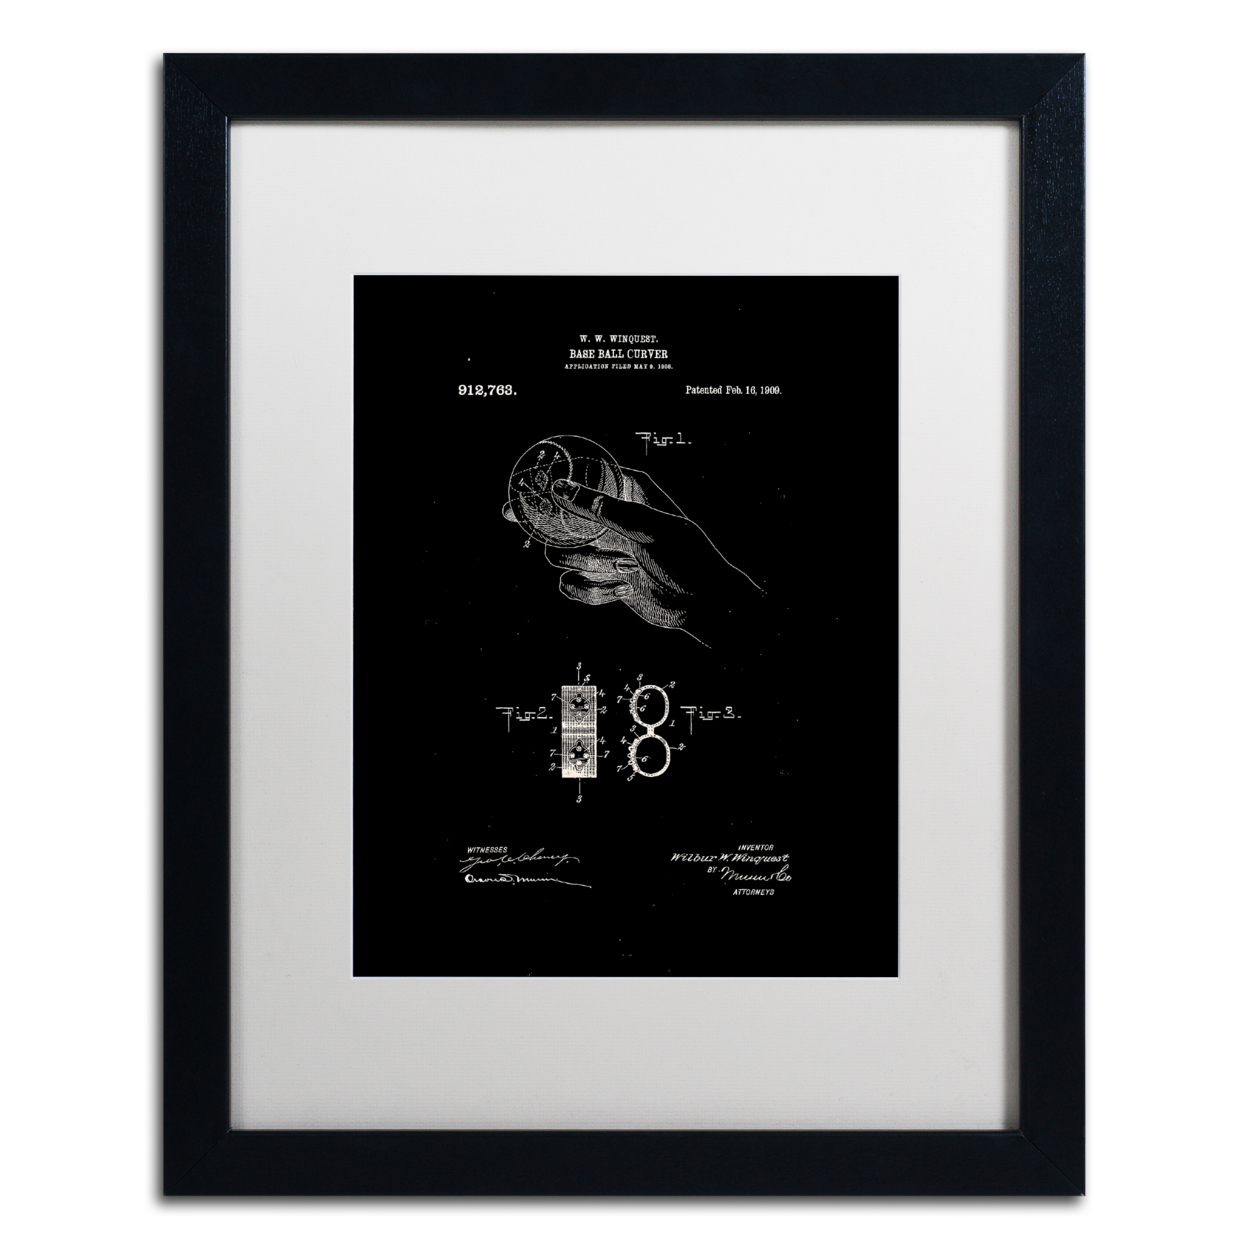 Claire Doherty 'Baseball Curver Patent 1909 Black' Black Wooden Framed Art 18 X 22 Inches